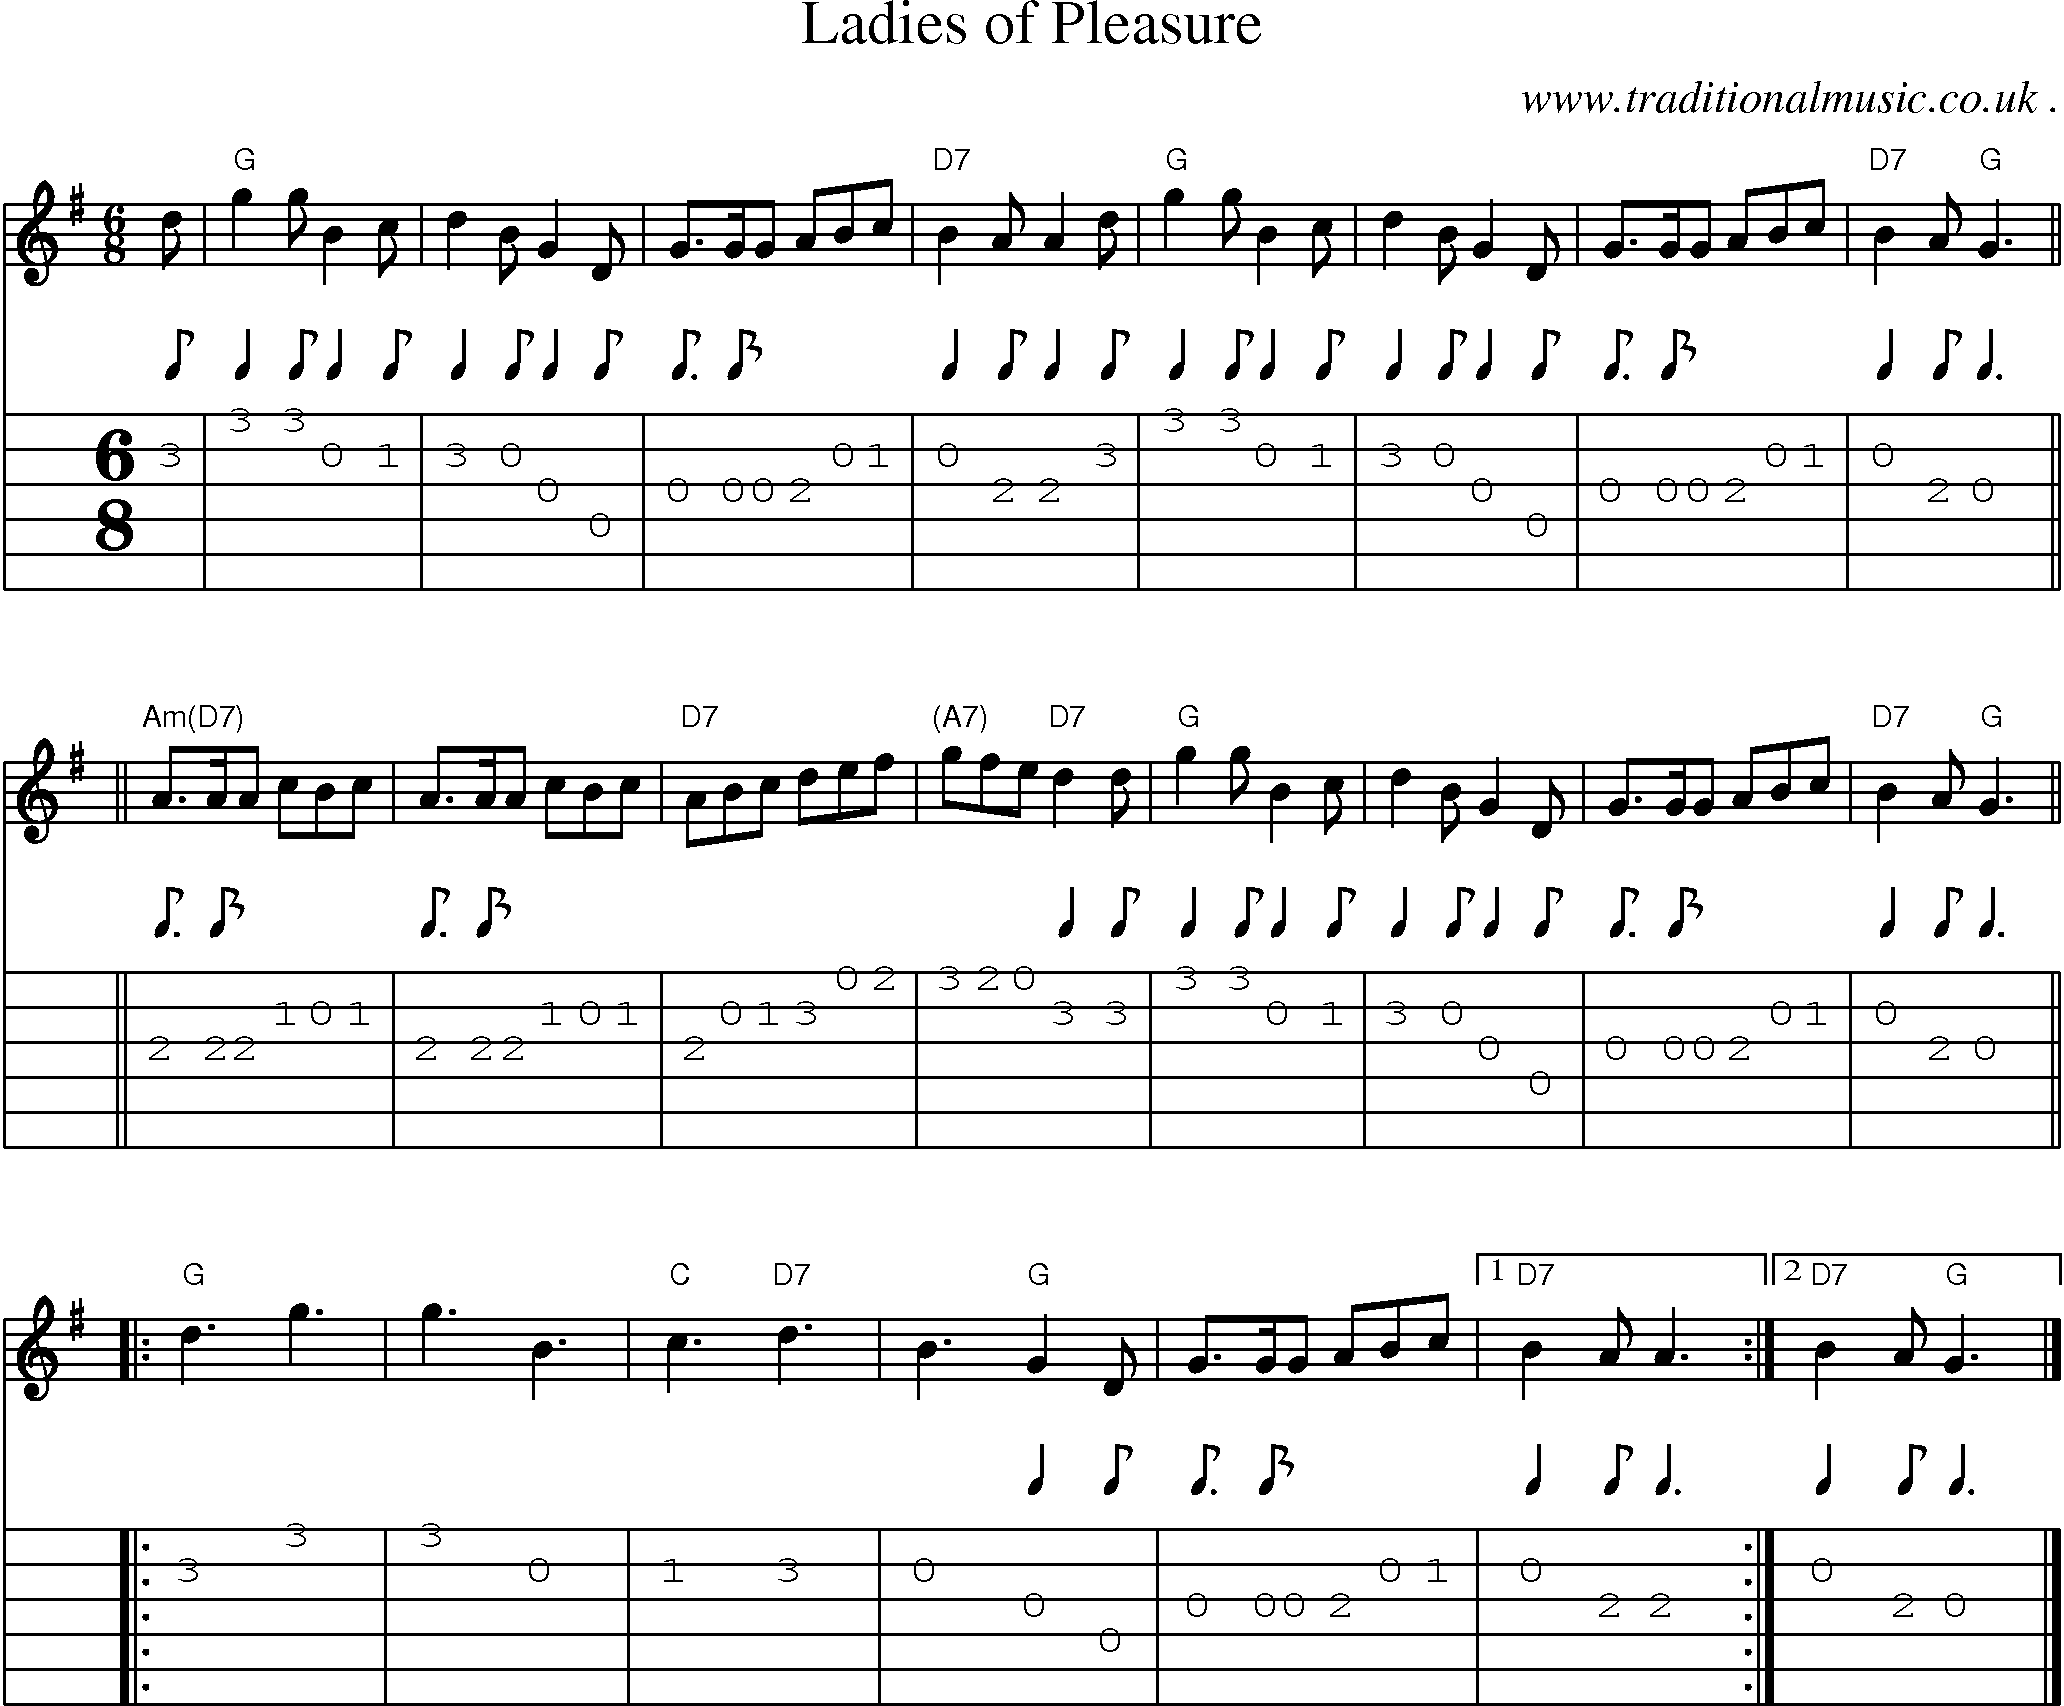 Sheet-music  score, Chords and Guitar Tabs for Ladies Of Pleasure